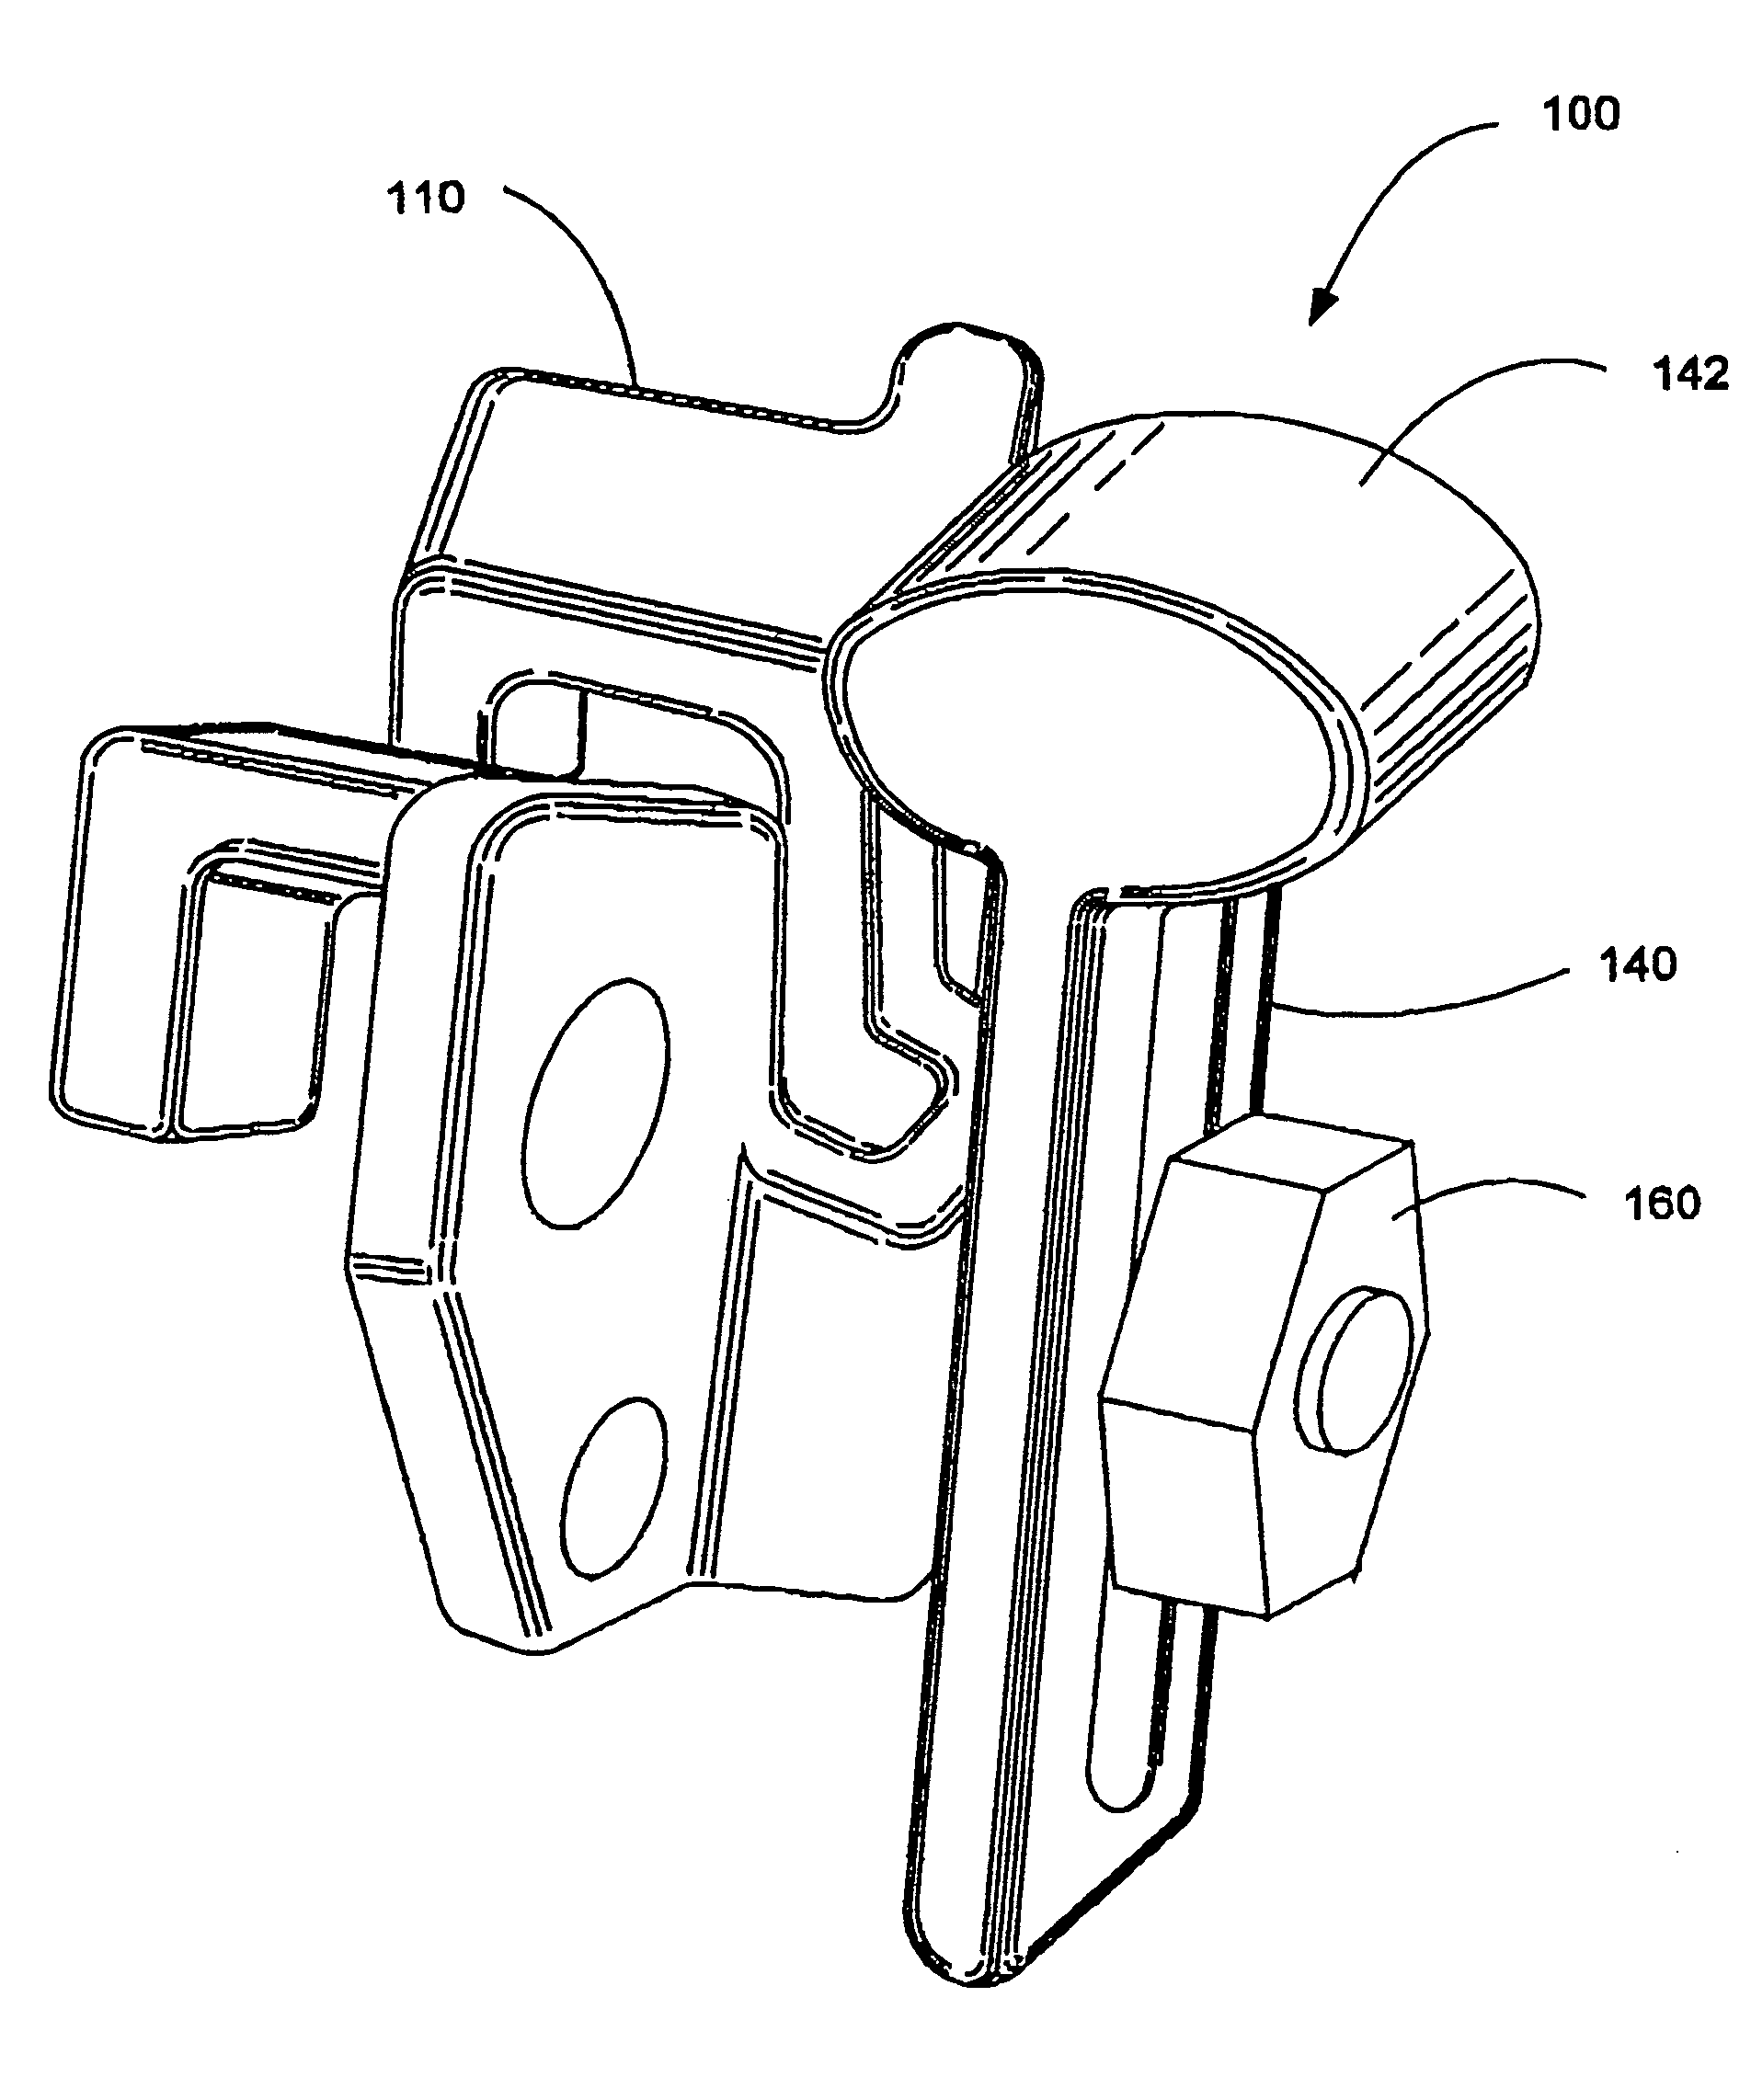 Interspinous process and sacrum implant and method